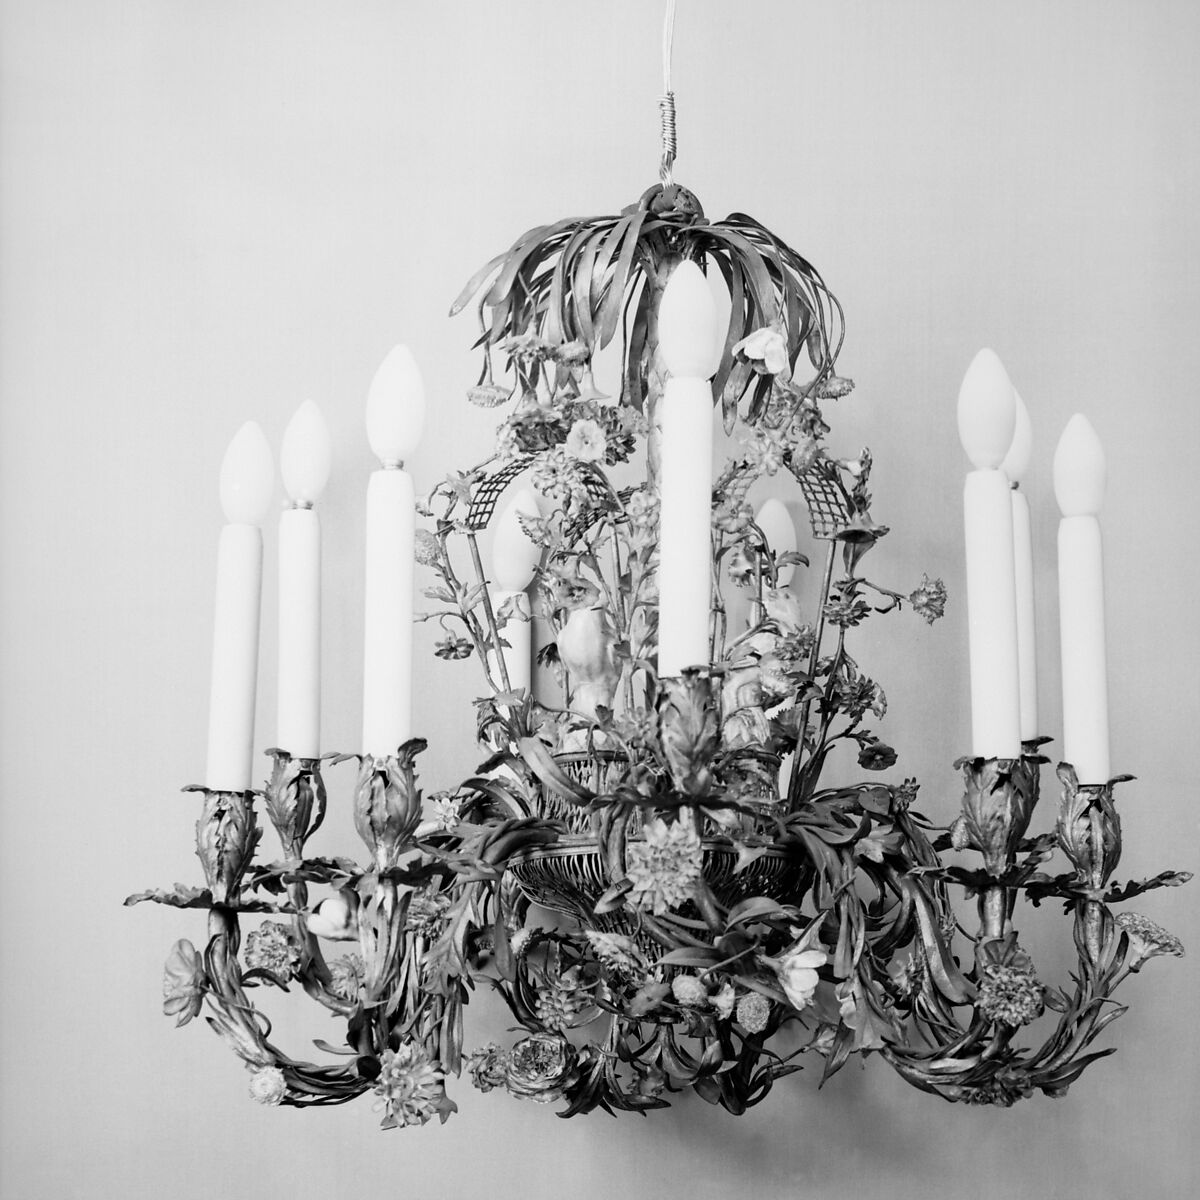 Chandelier, Brass, water-gilt (?), porcelain, possibly French 